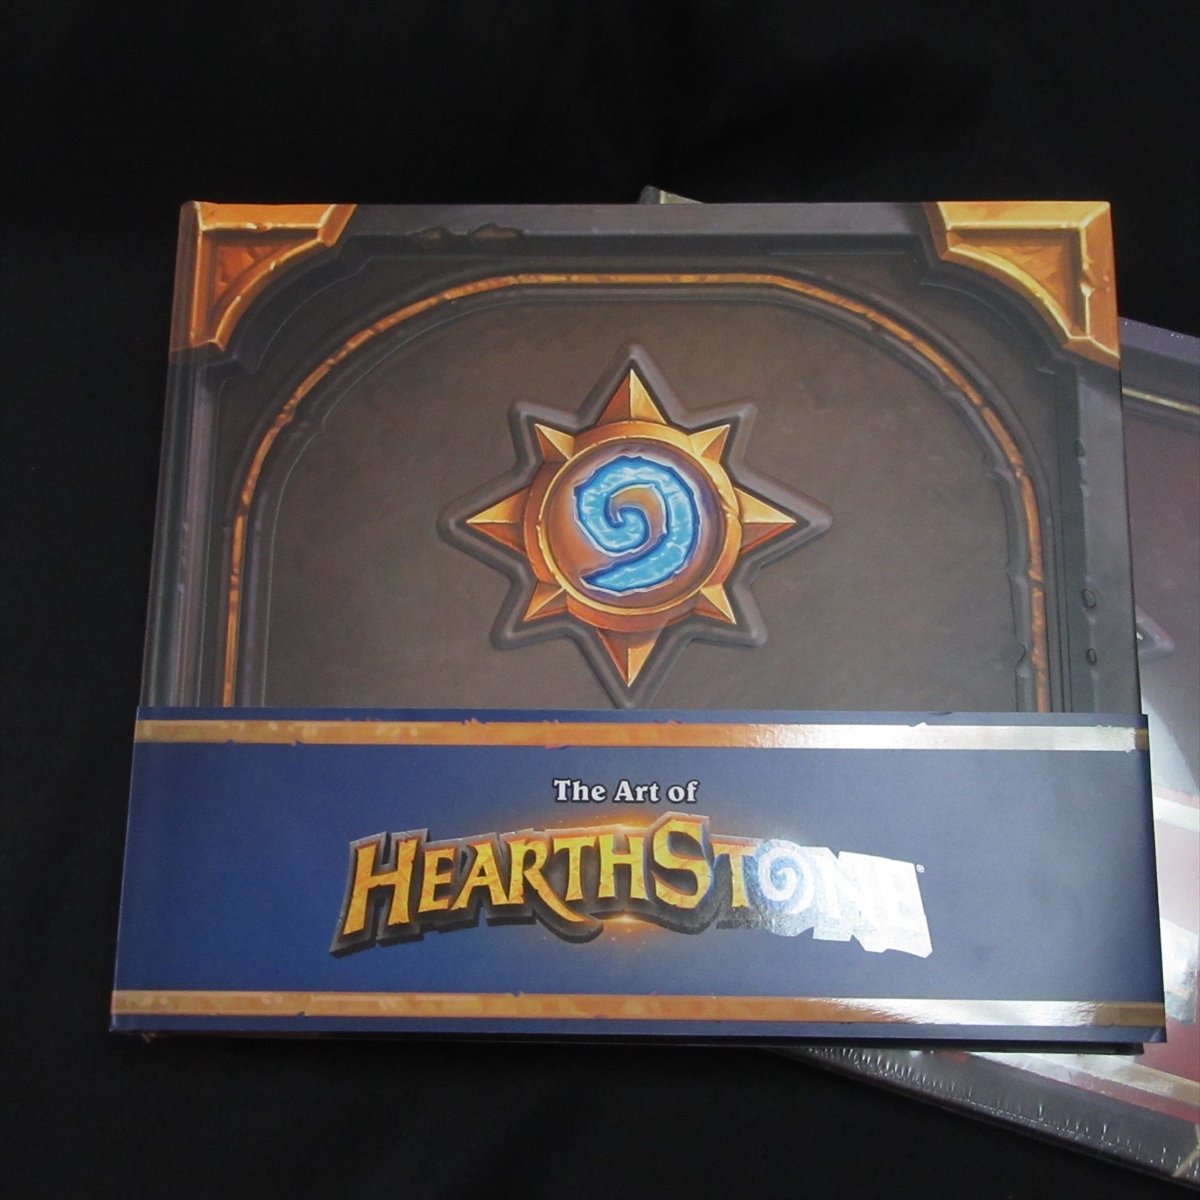  is -s Stone art book foreign book 2 pcs. set [THE ART OF HEARTHSTONE] & [THE ART OF HEARTHSTONE vol.2] # free shipping English 